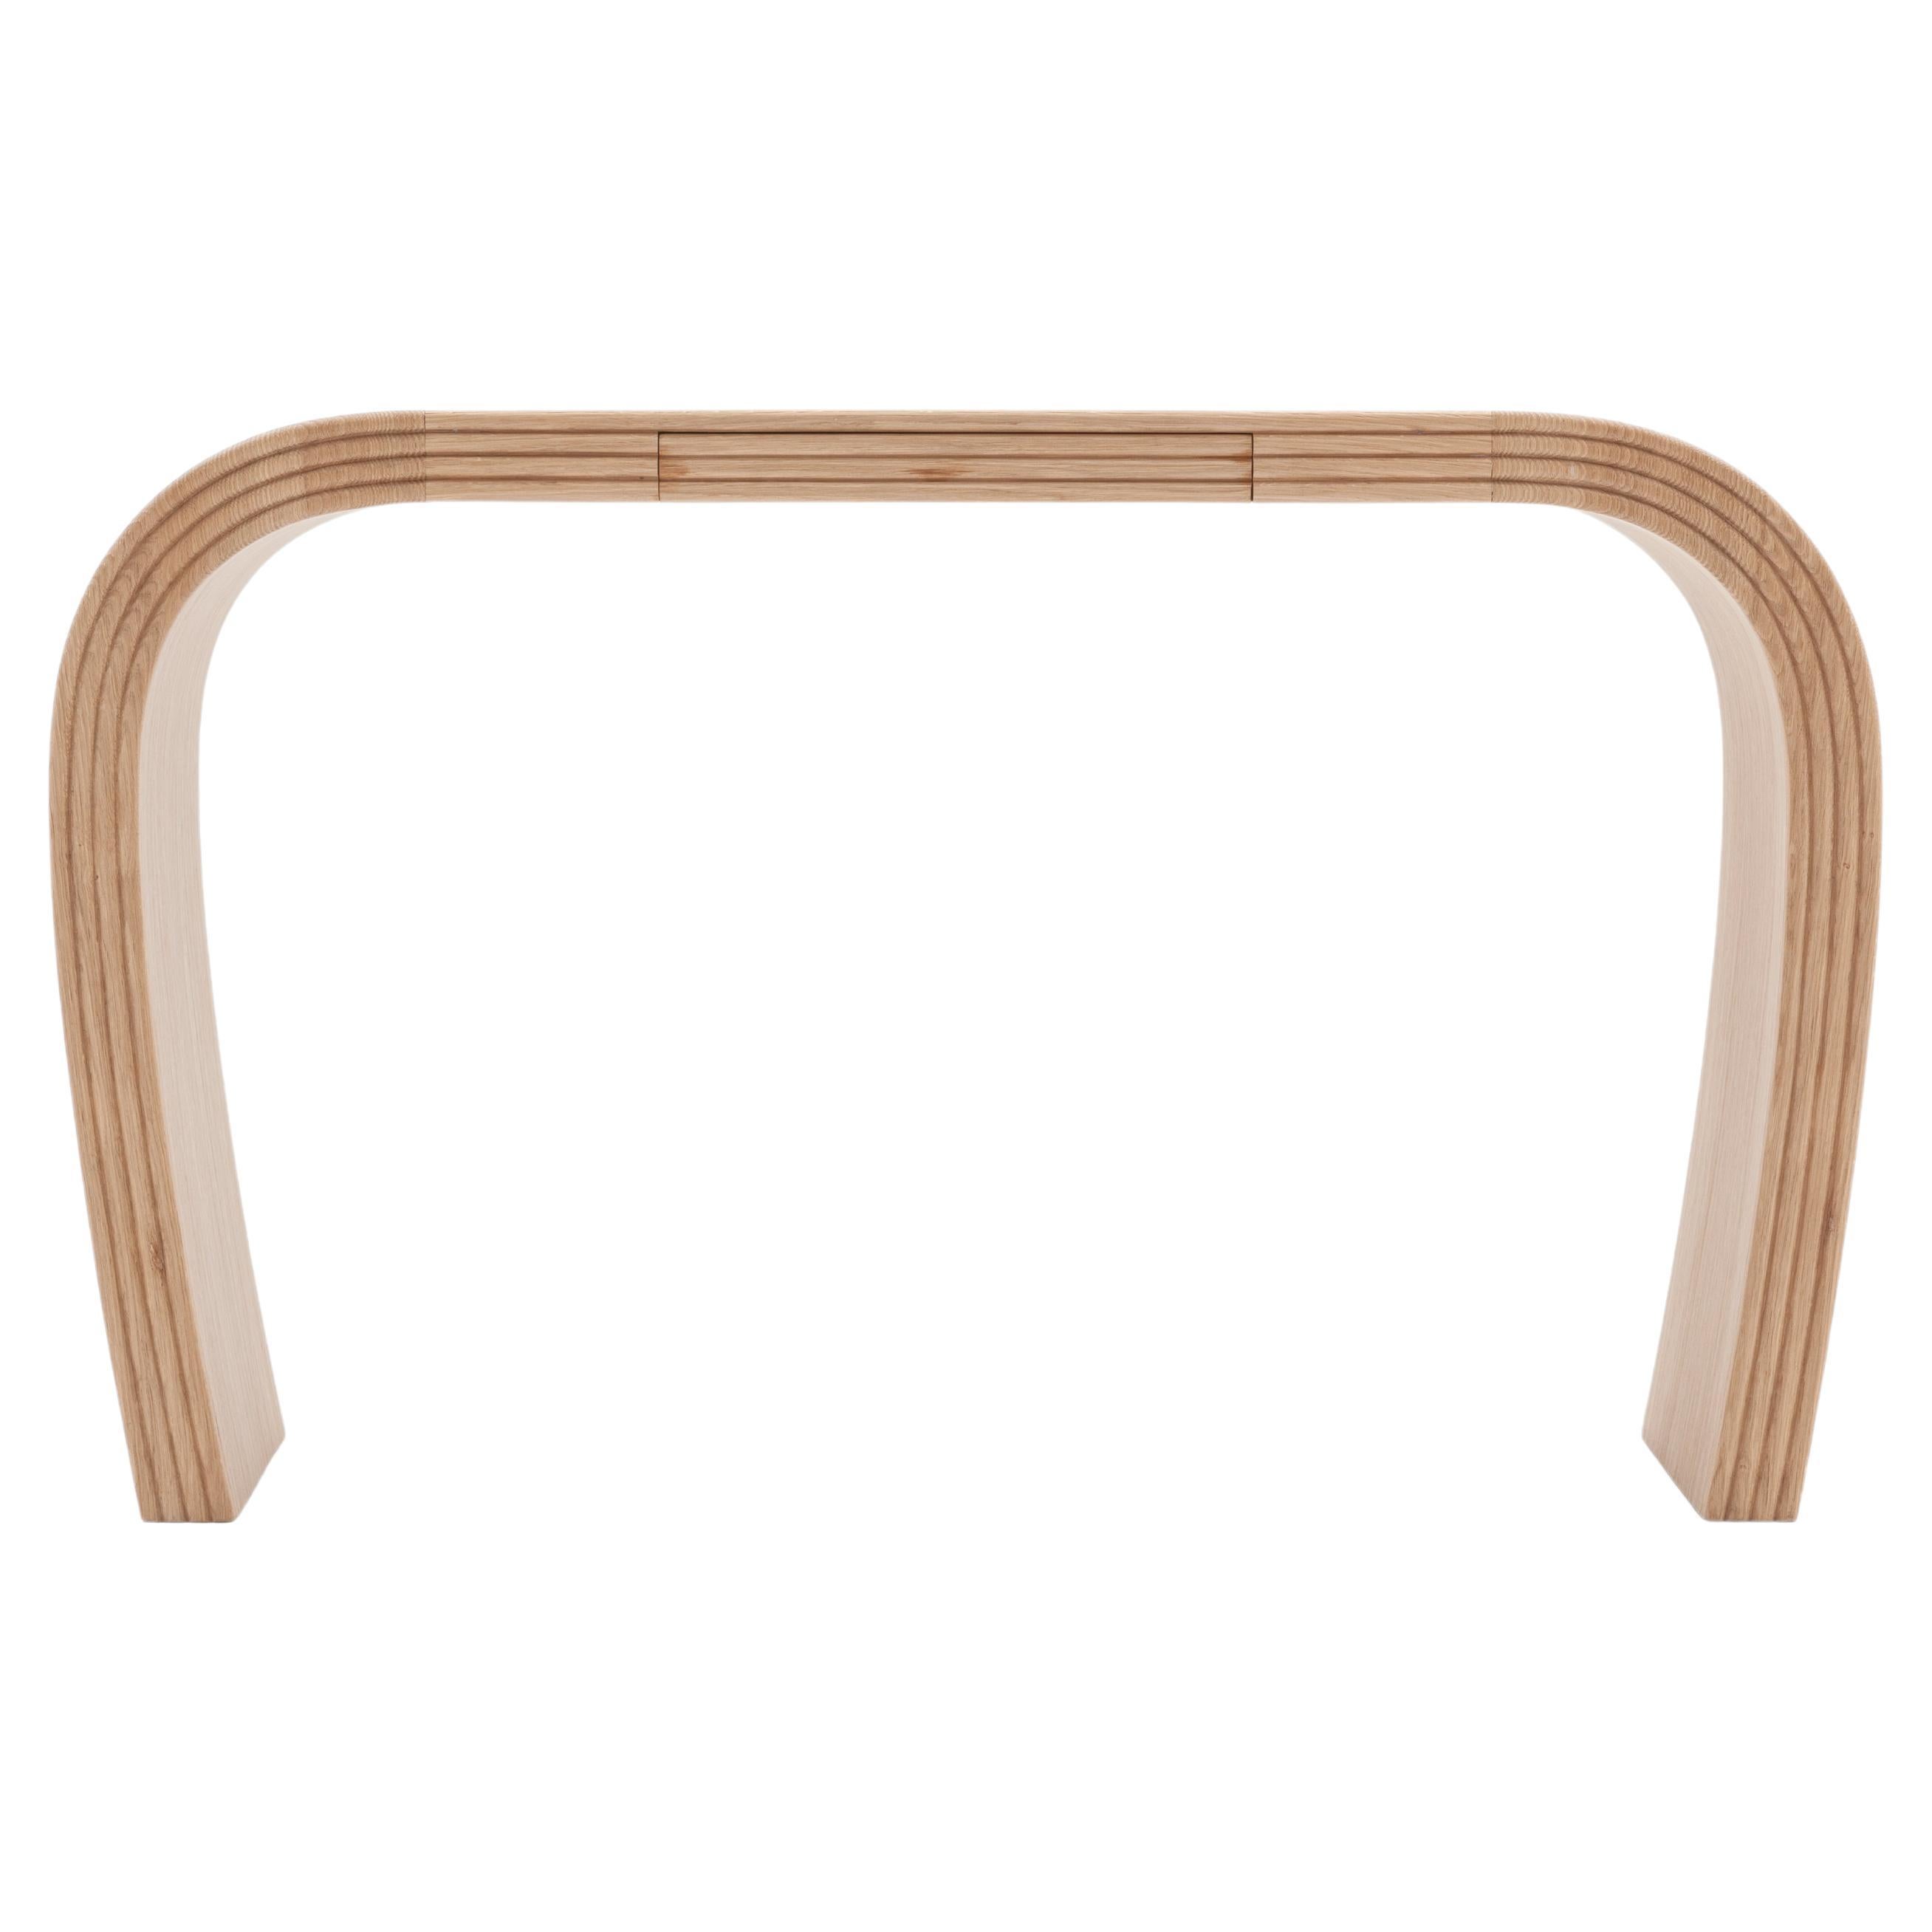 Otto handmade wood console table